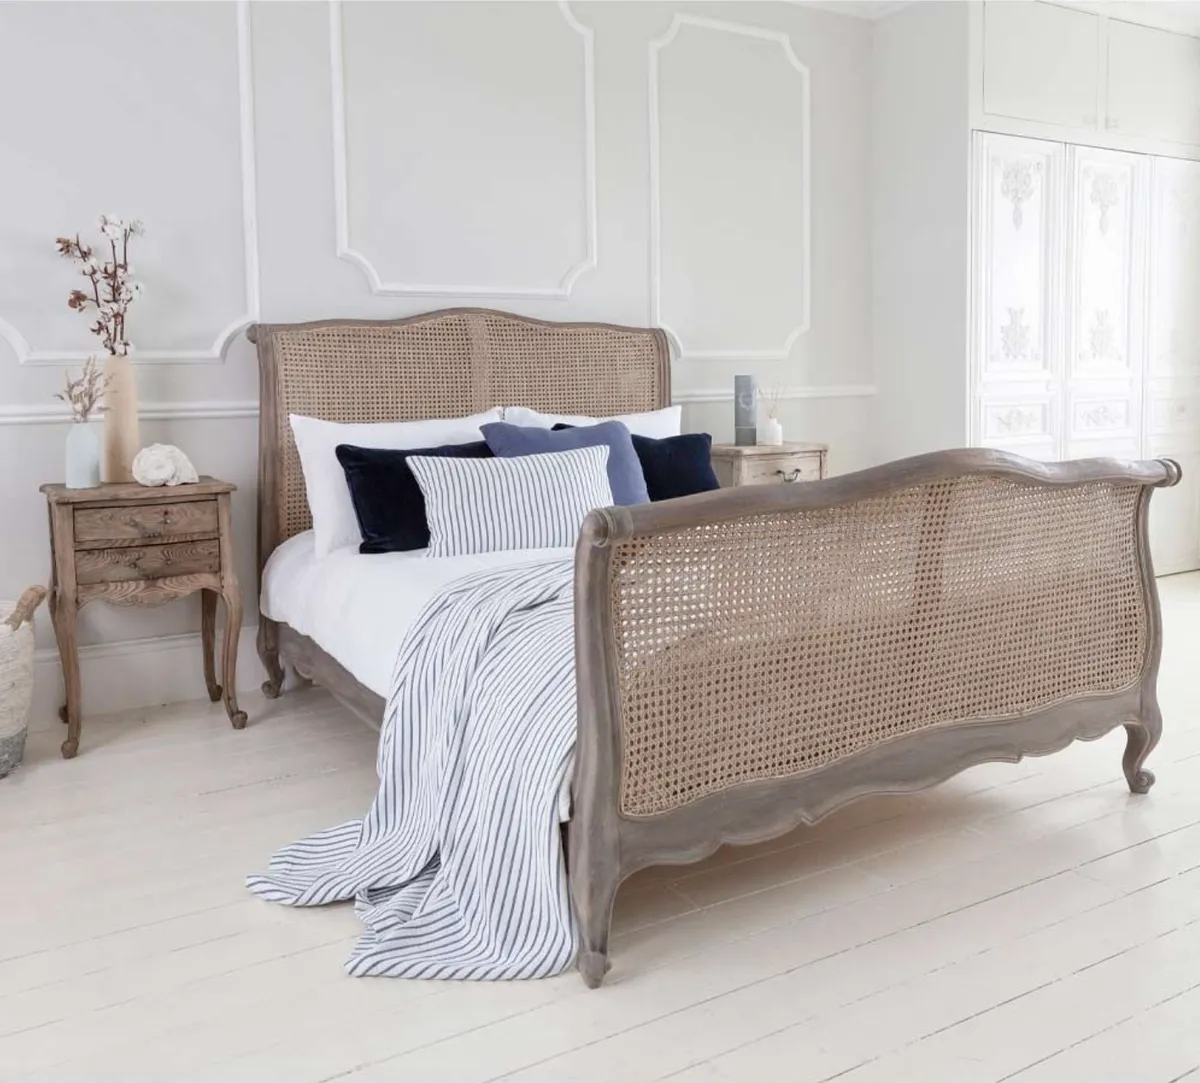 Chateauneuf Whitewash Rattan Sleigh Bed, The French Bedroom Company